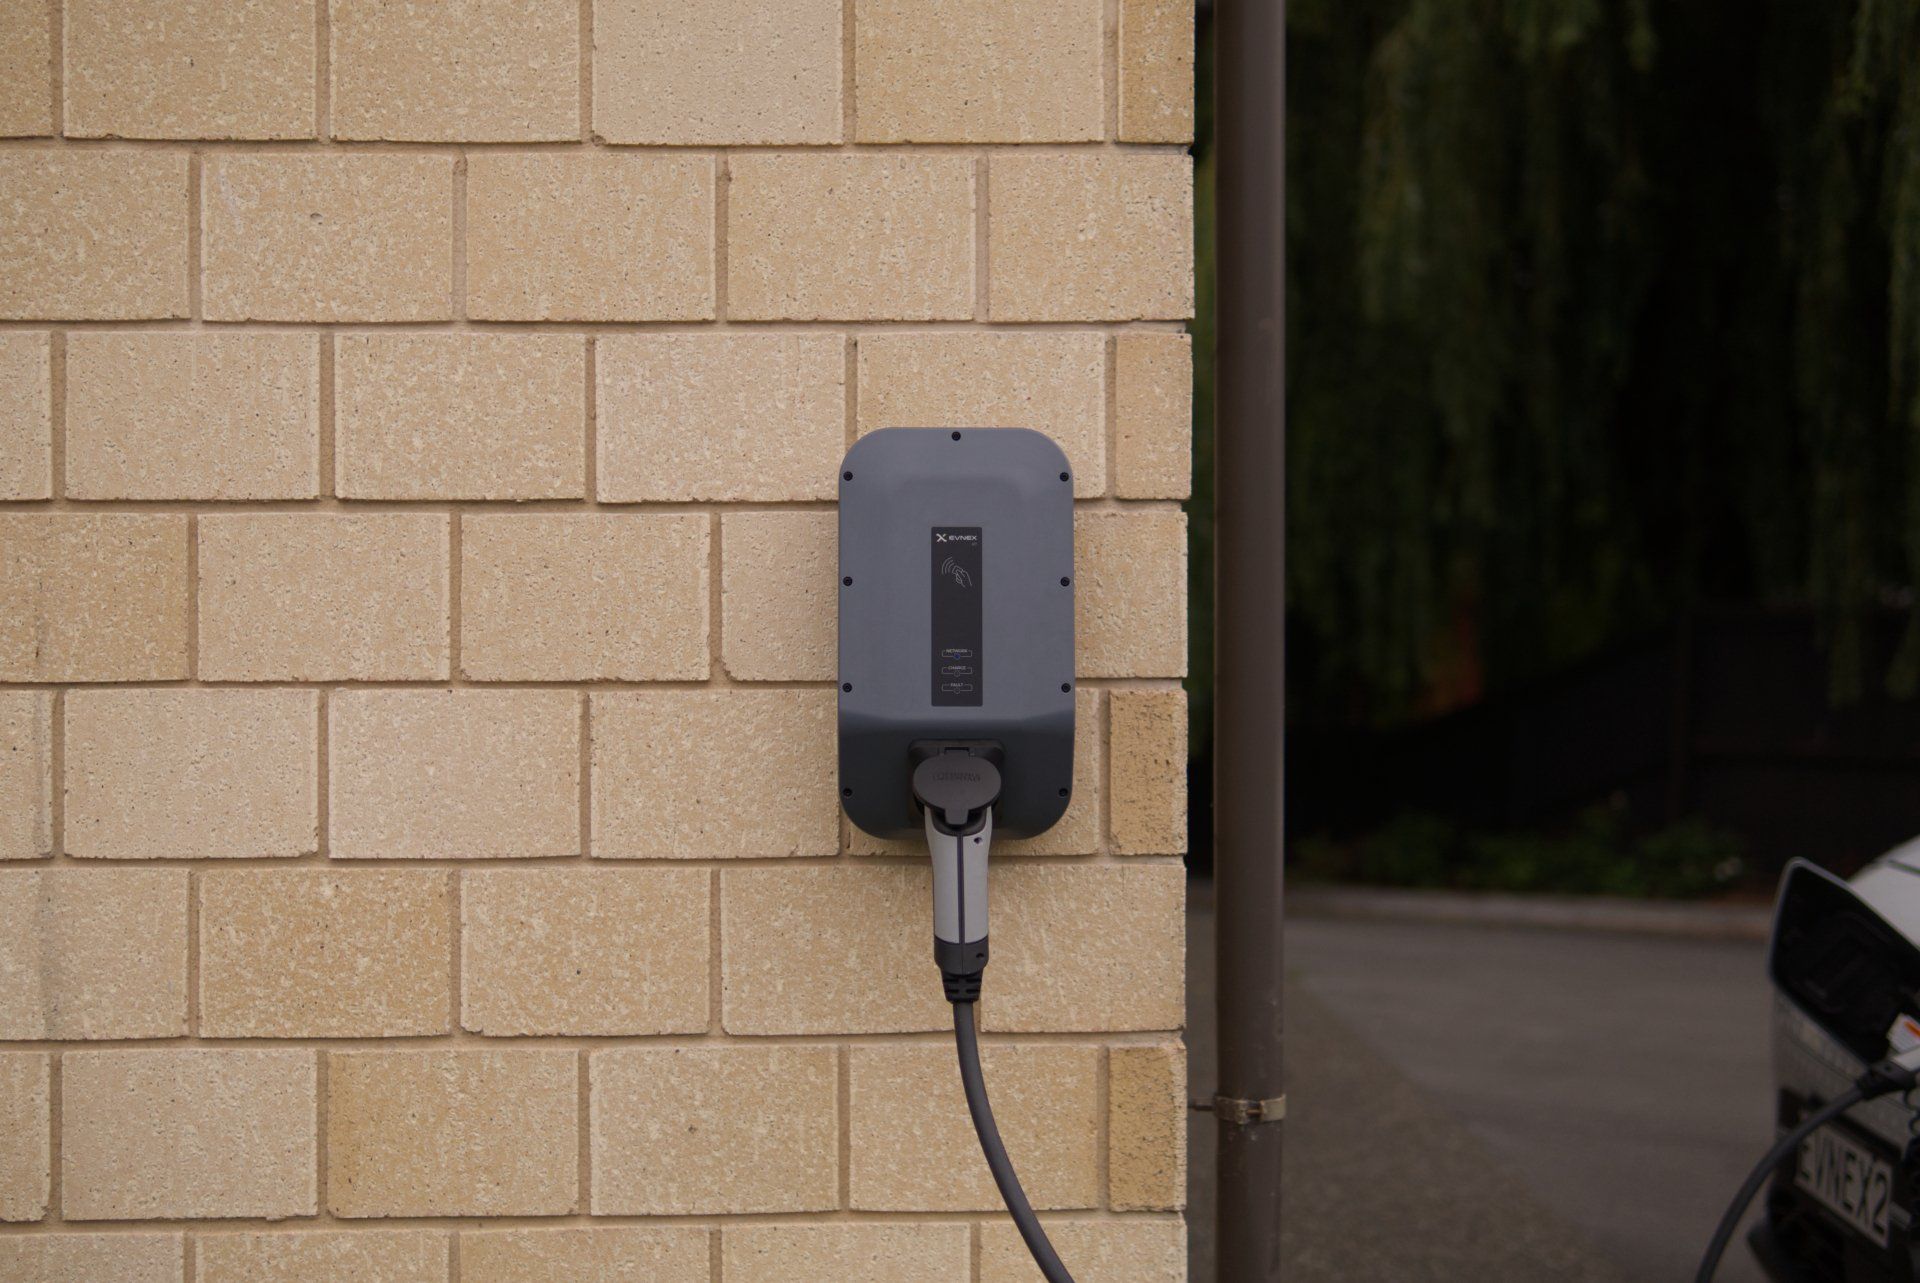 An electric car is being charged on a brick wall.